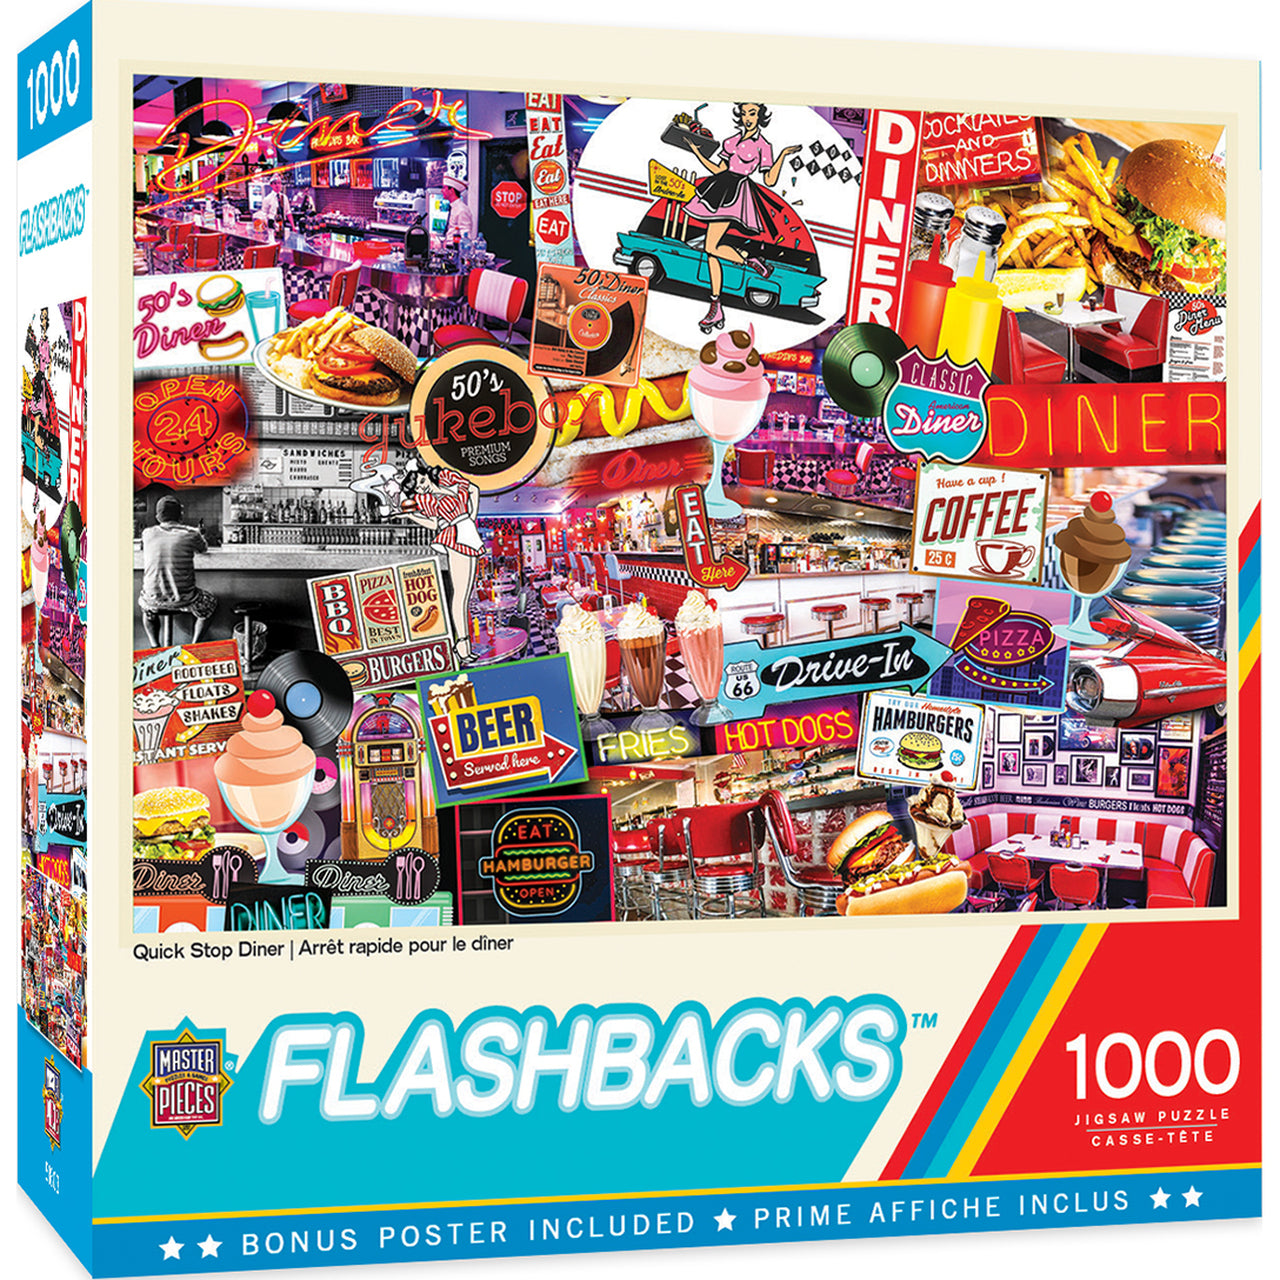 Flashbacks Quick Stop Diner 1000 Piece Jigsaw Puzzle by Masterpieces